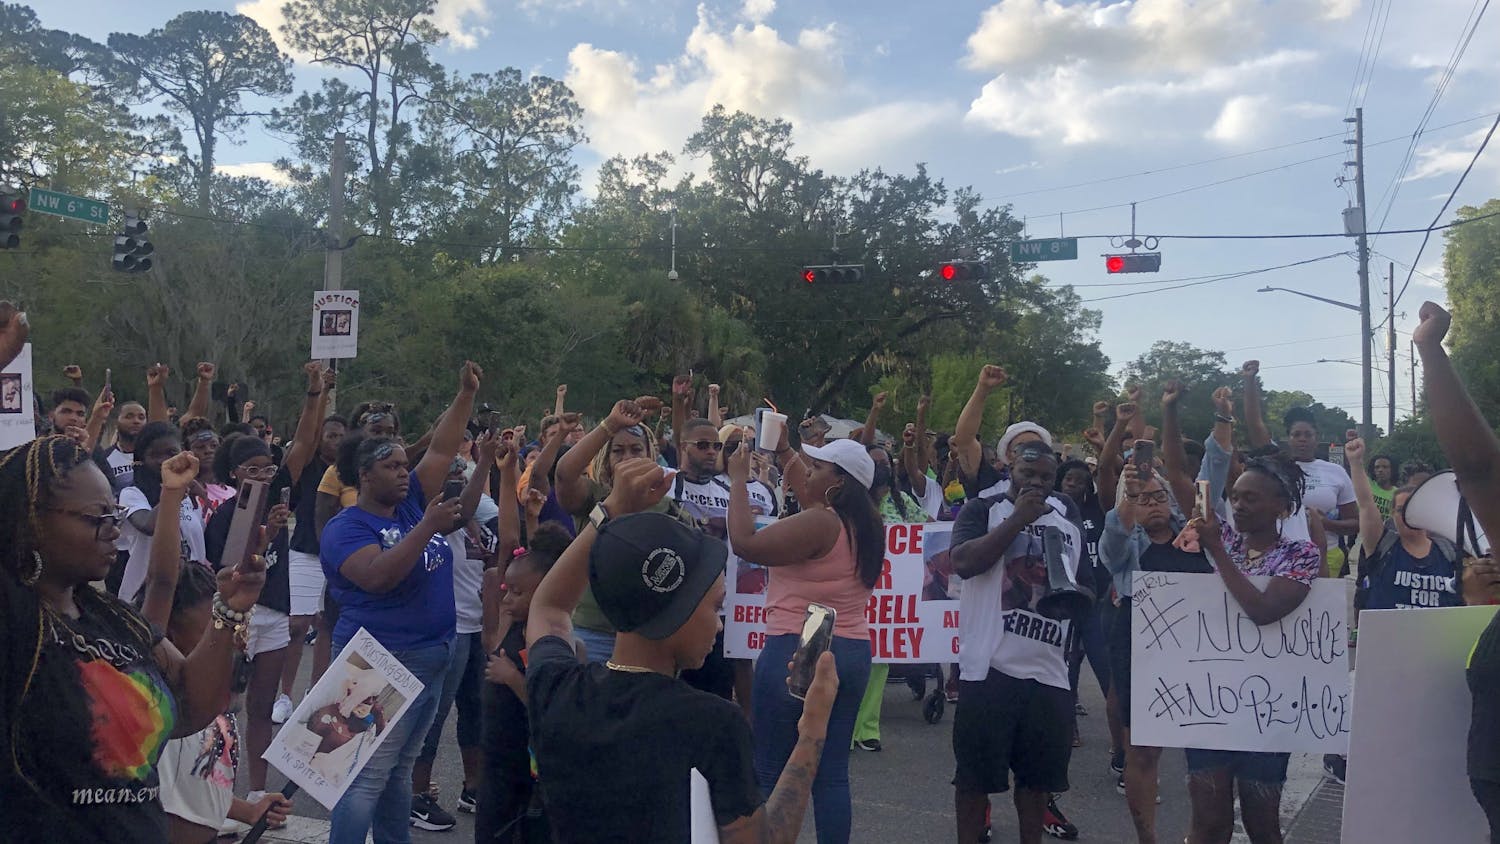 Protesters gathered in the streets chanting “No Justice, No Peace” for Terrell Bradley Sunday, July 17, 2022.